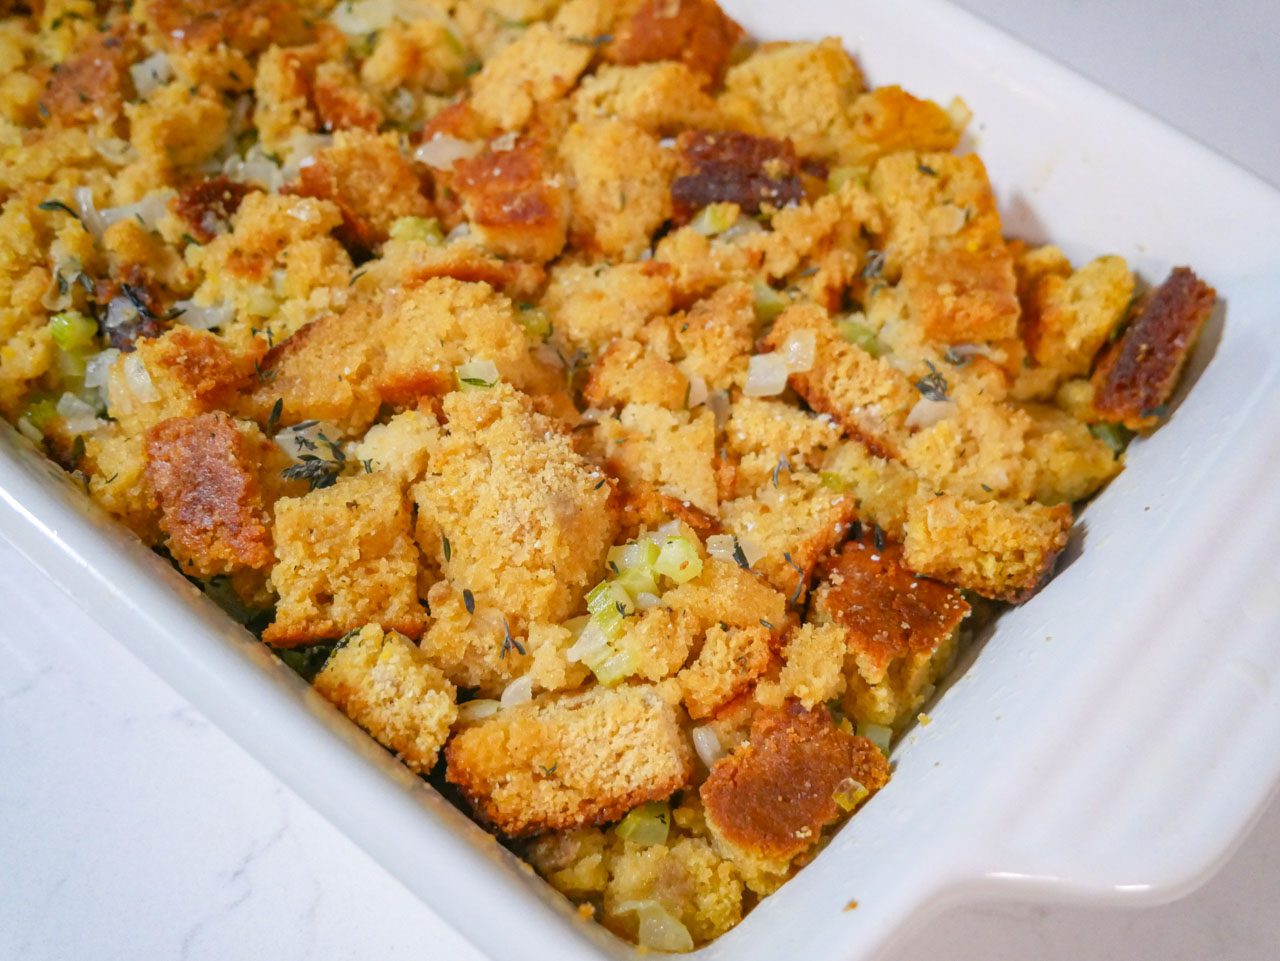 Grain-free cornbread stuffing before baked in oven